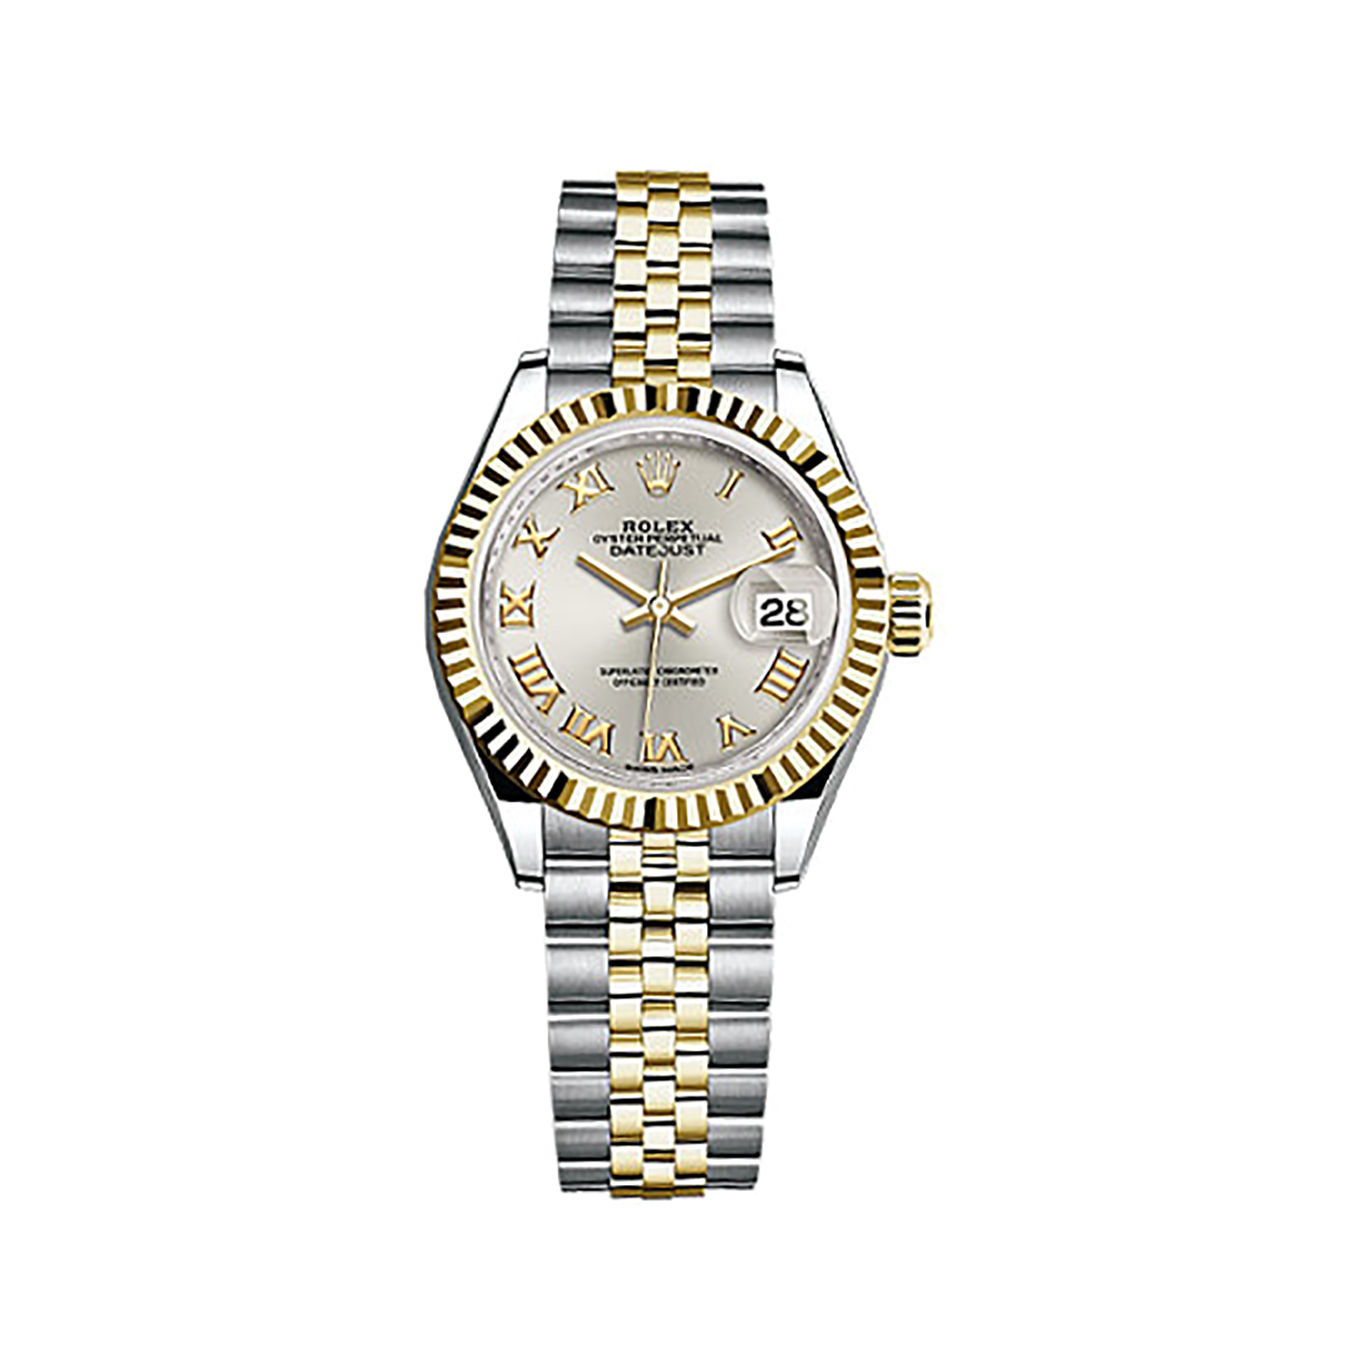 Lady-Datejust 28 279173 Gold & Stainless Steel Watch (Silver)